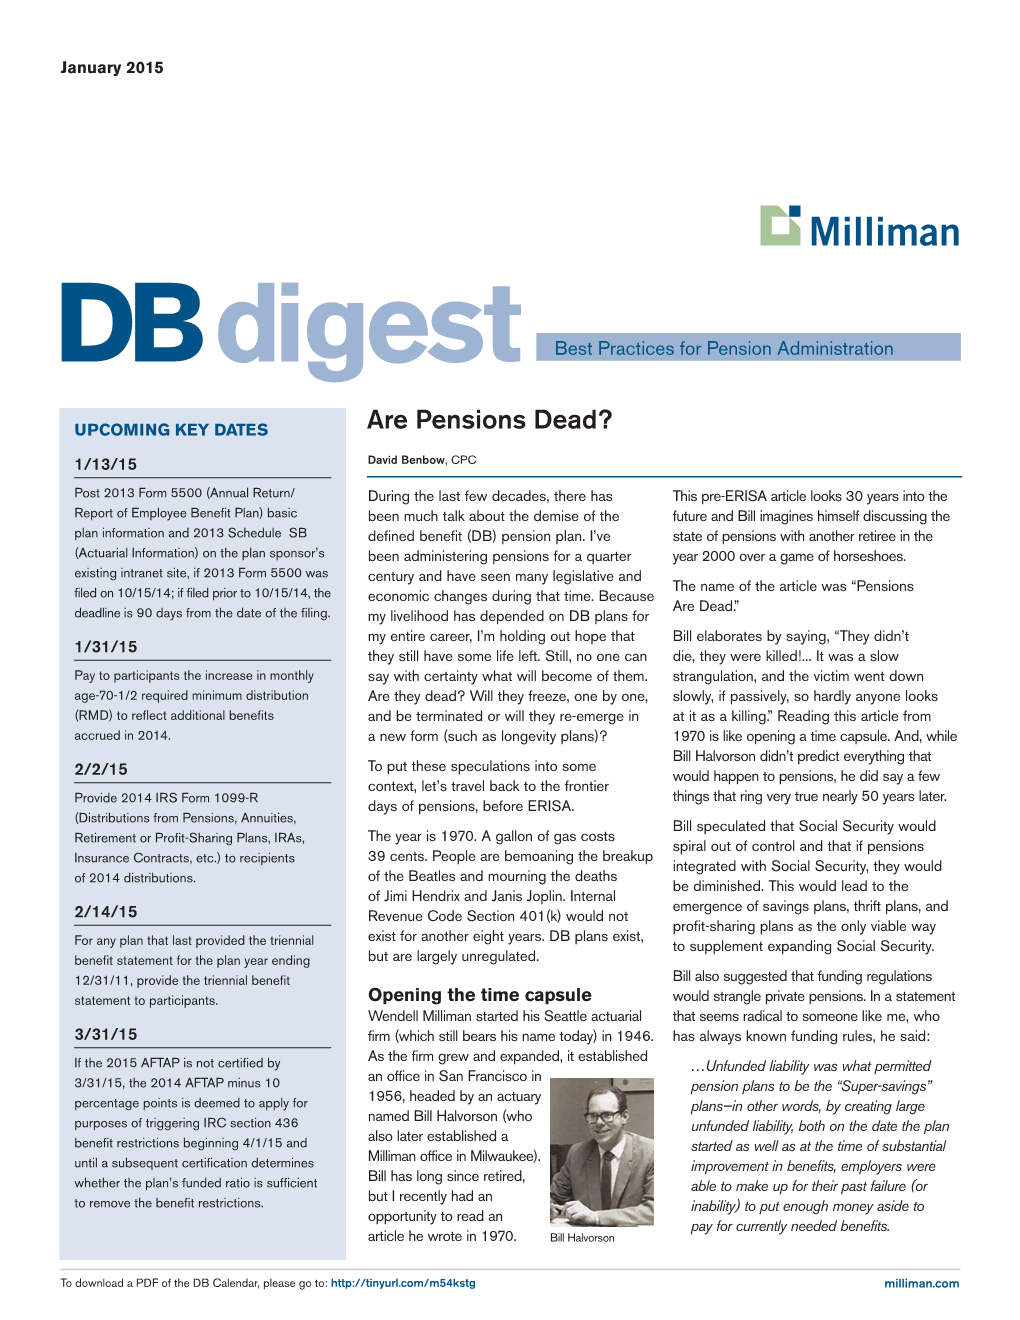 DB Digest Best Practices for Pension Administration